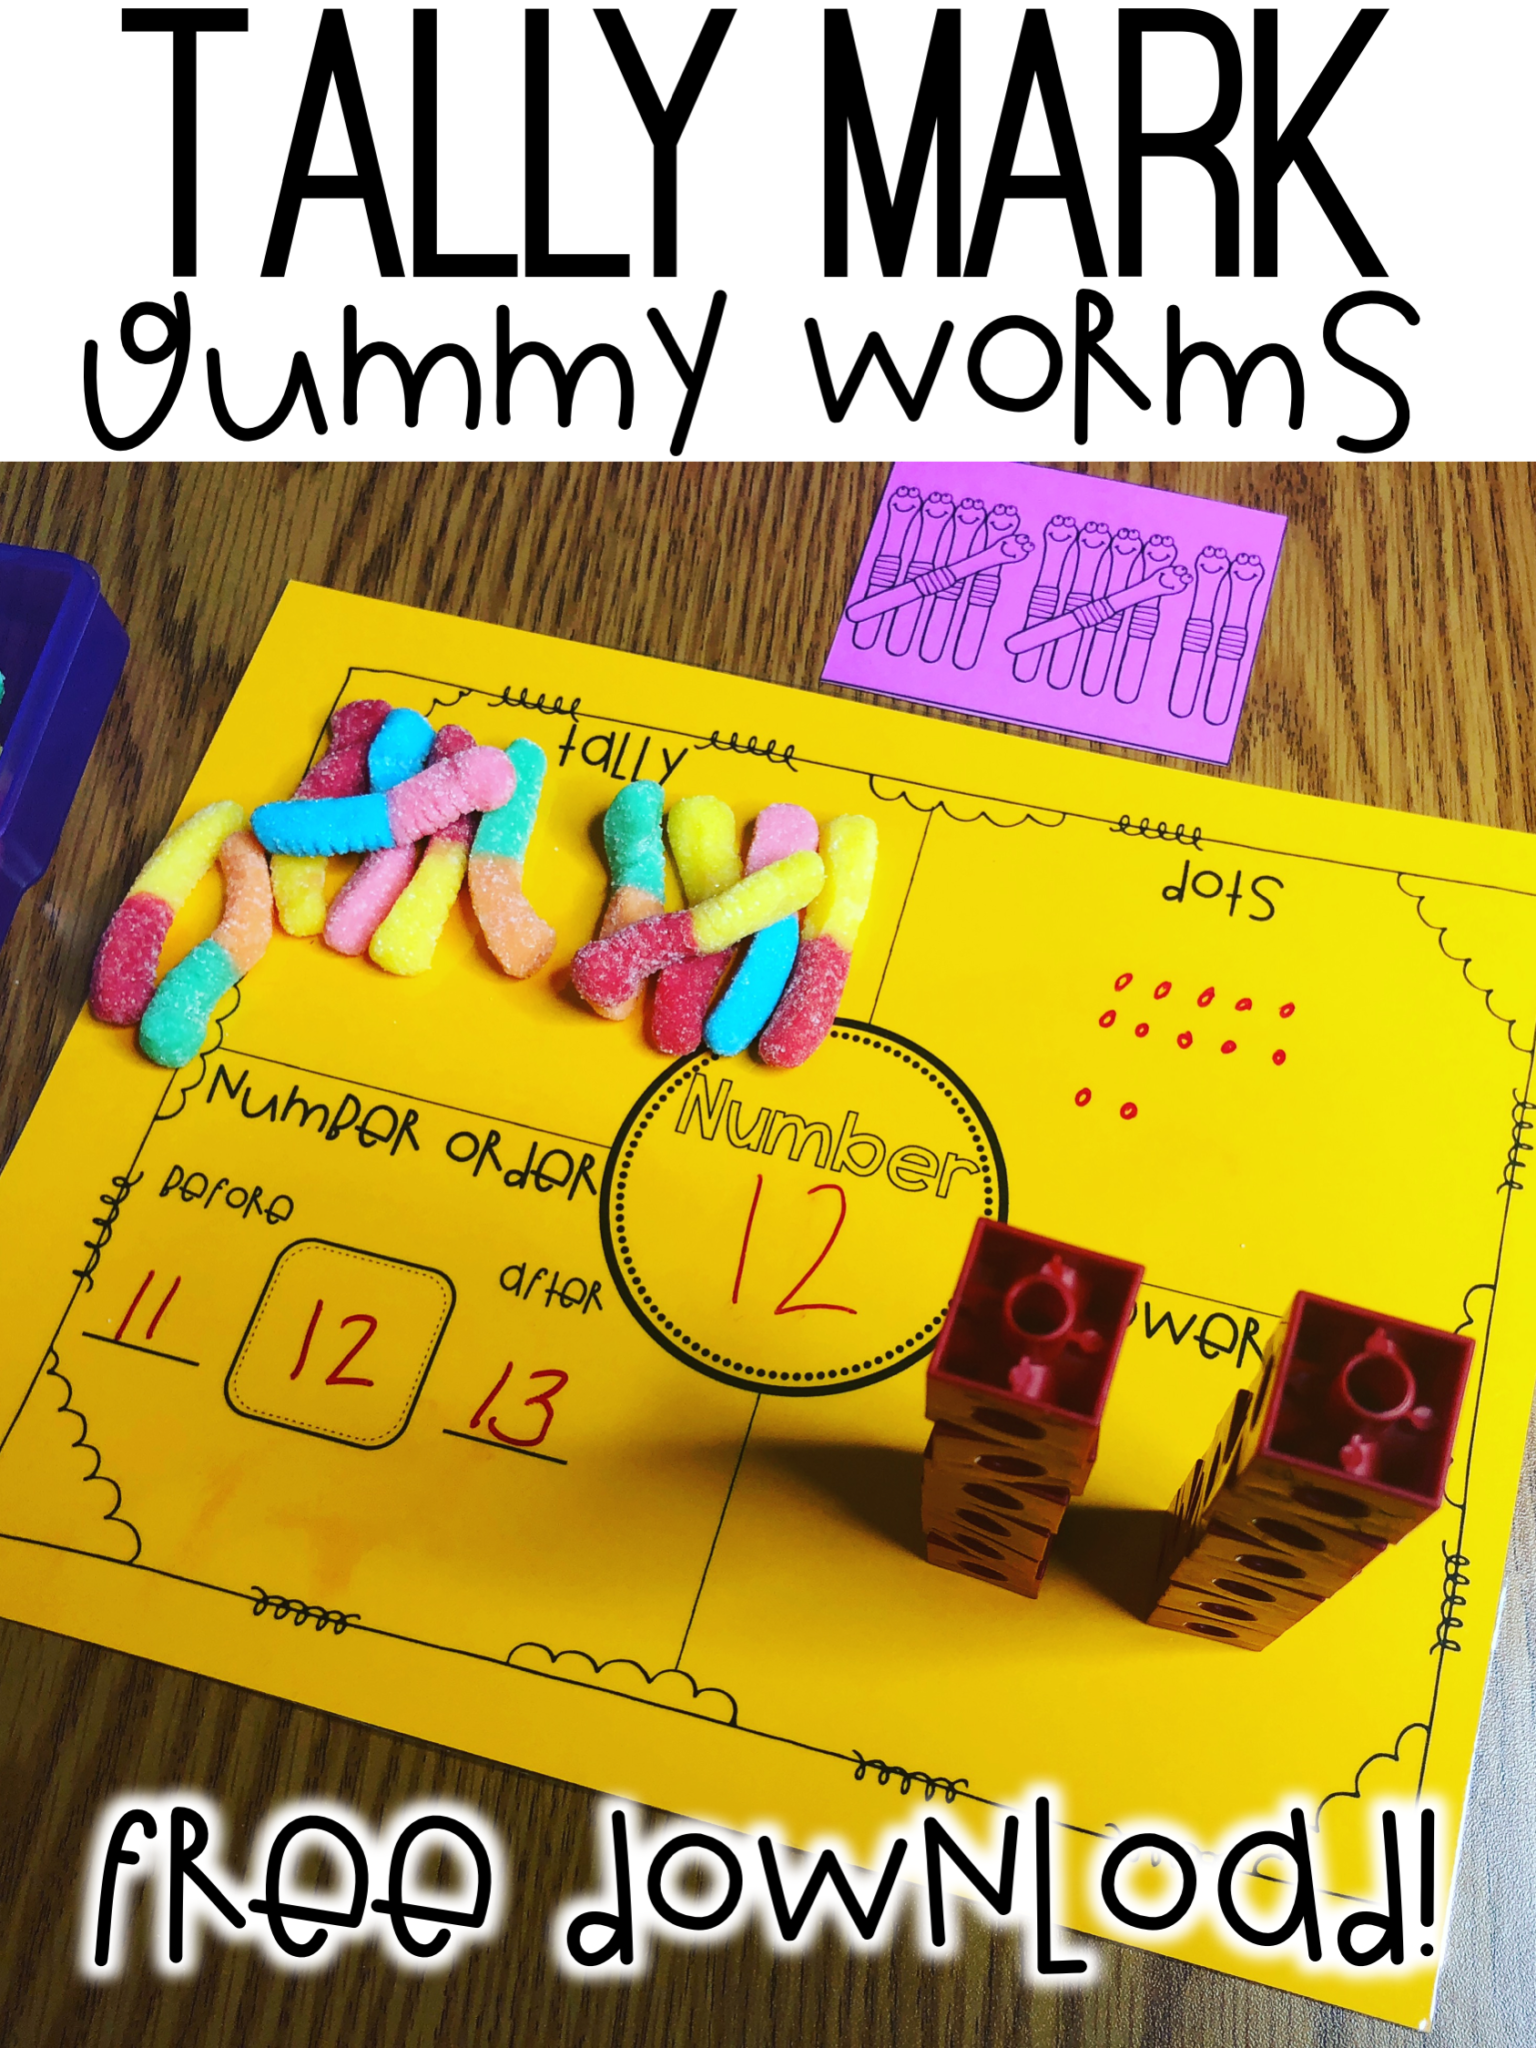 Tally mark free download. Free download for tally mark lesson and teaching number sense.